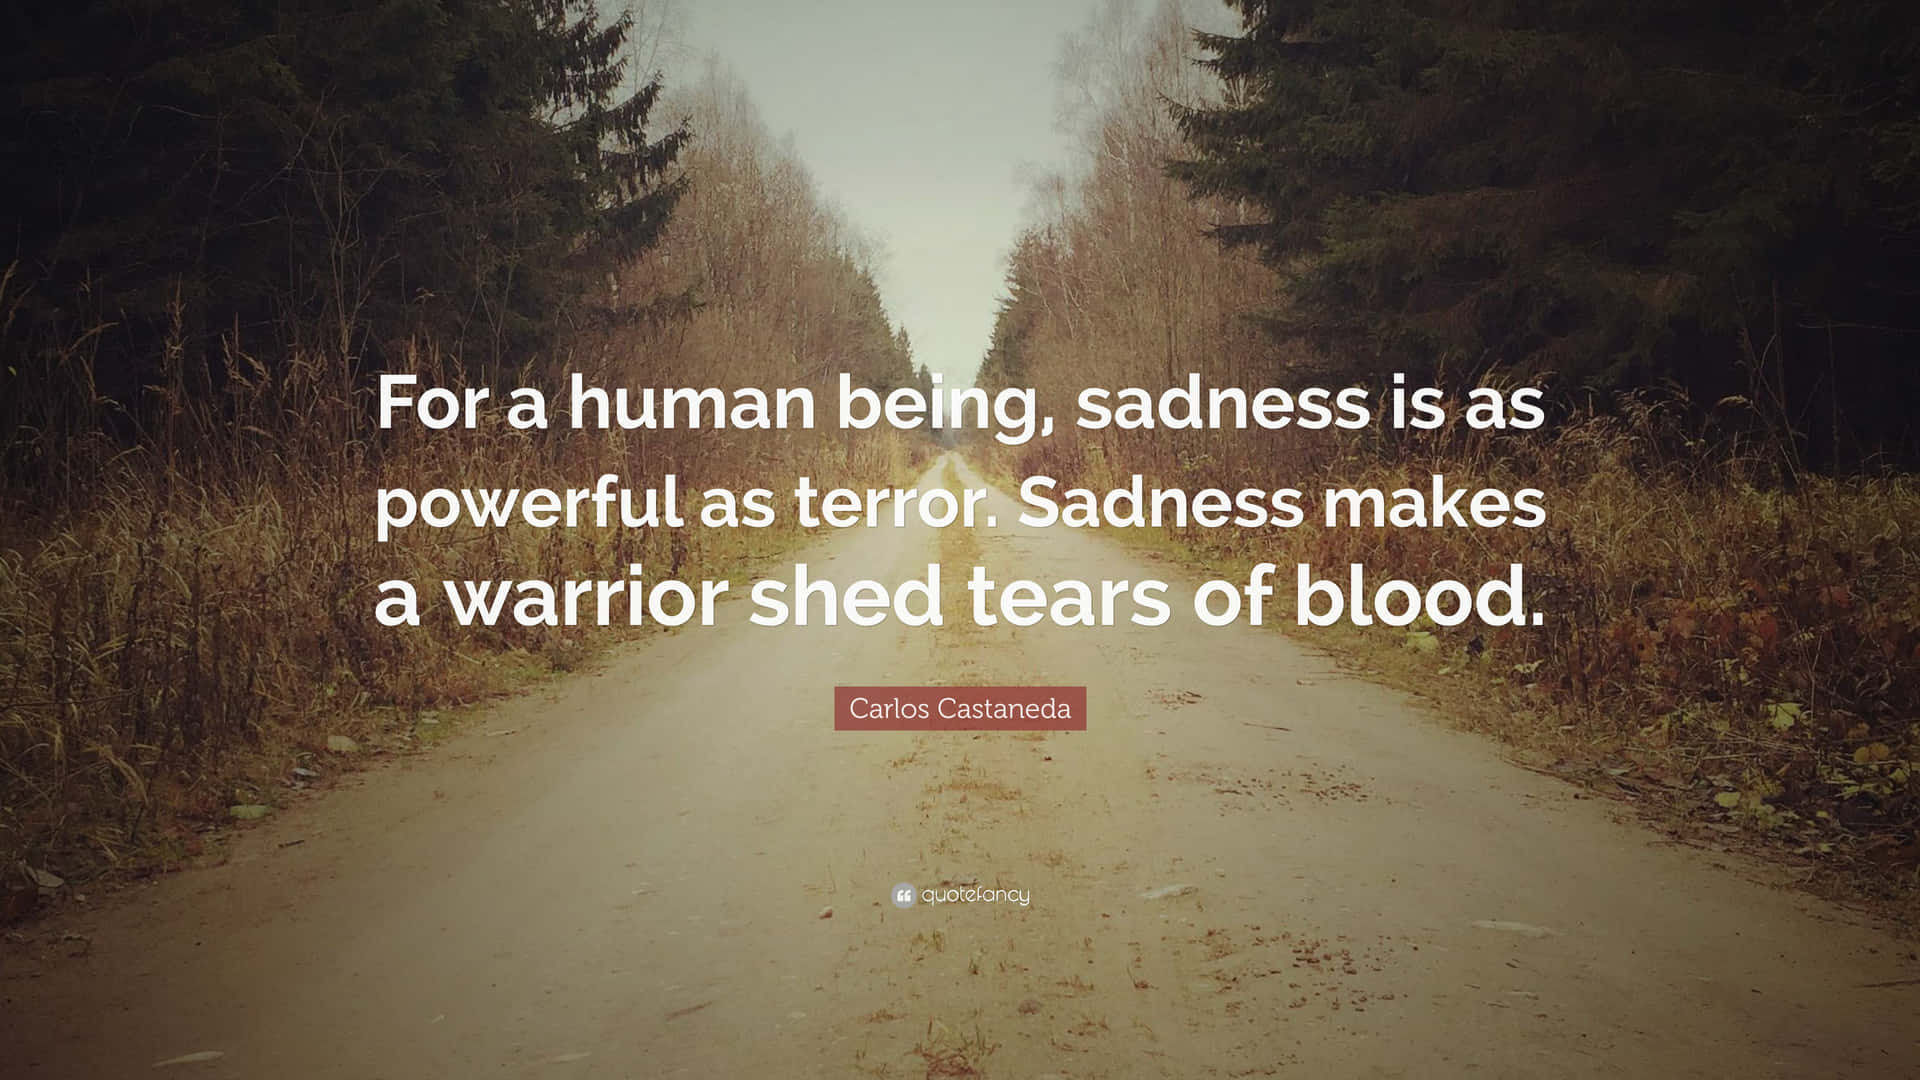 Sadness Quote On Forest Road Picture